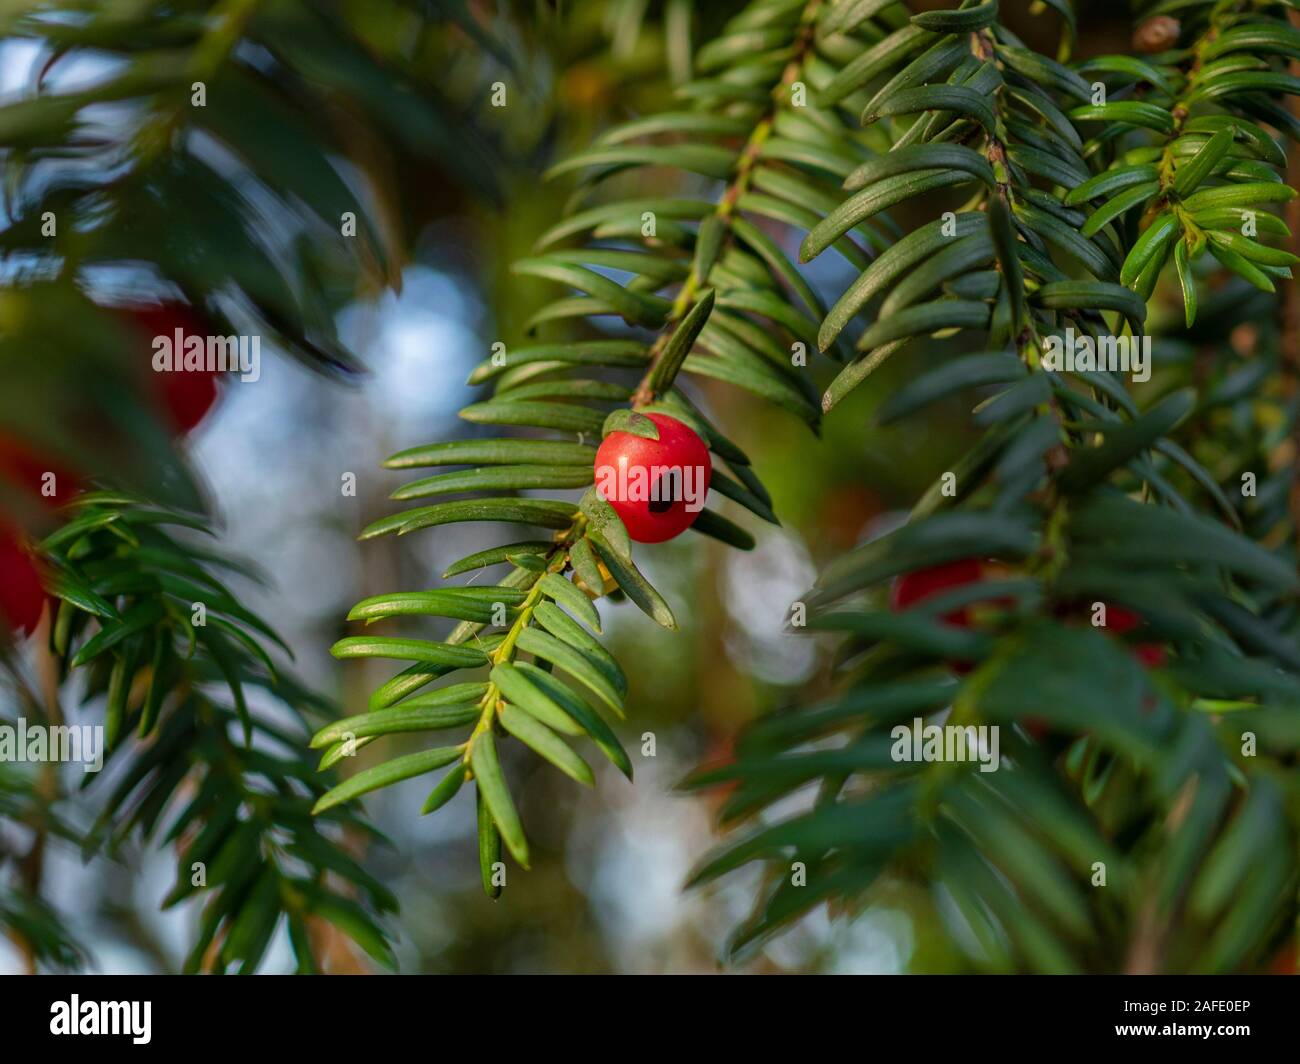 Branch of a yew tree, Taxus baccata, with green leaves and a single red berry Stock Photo